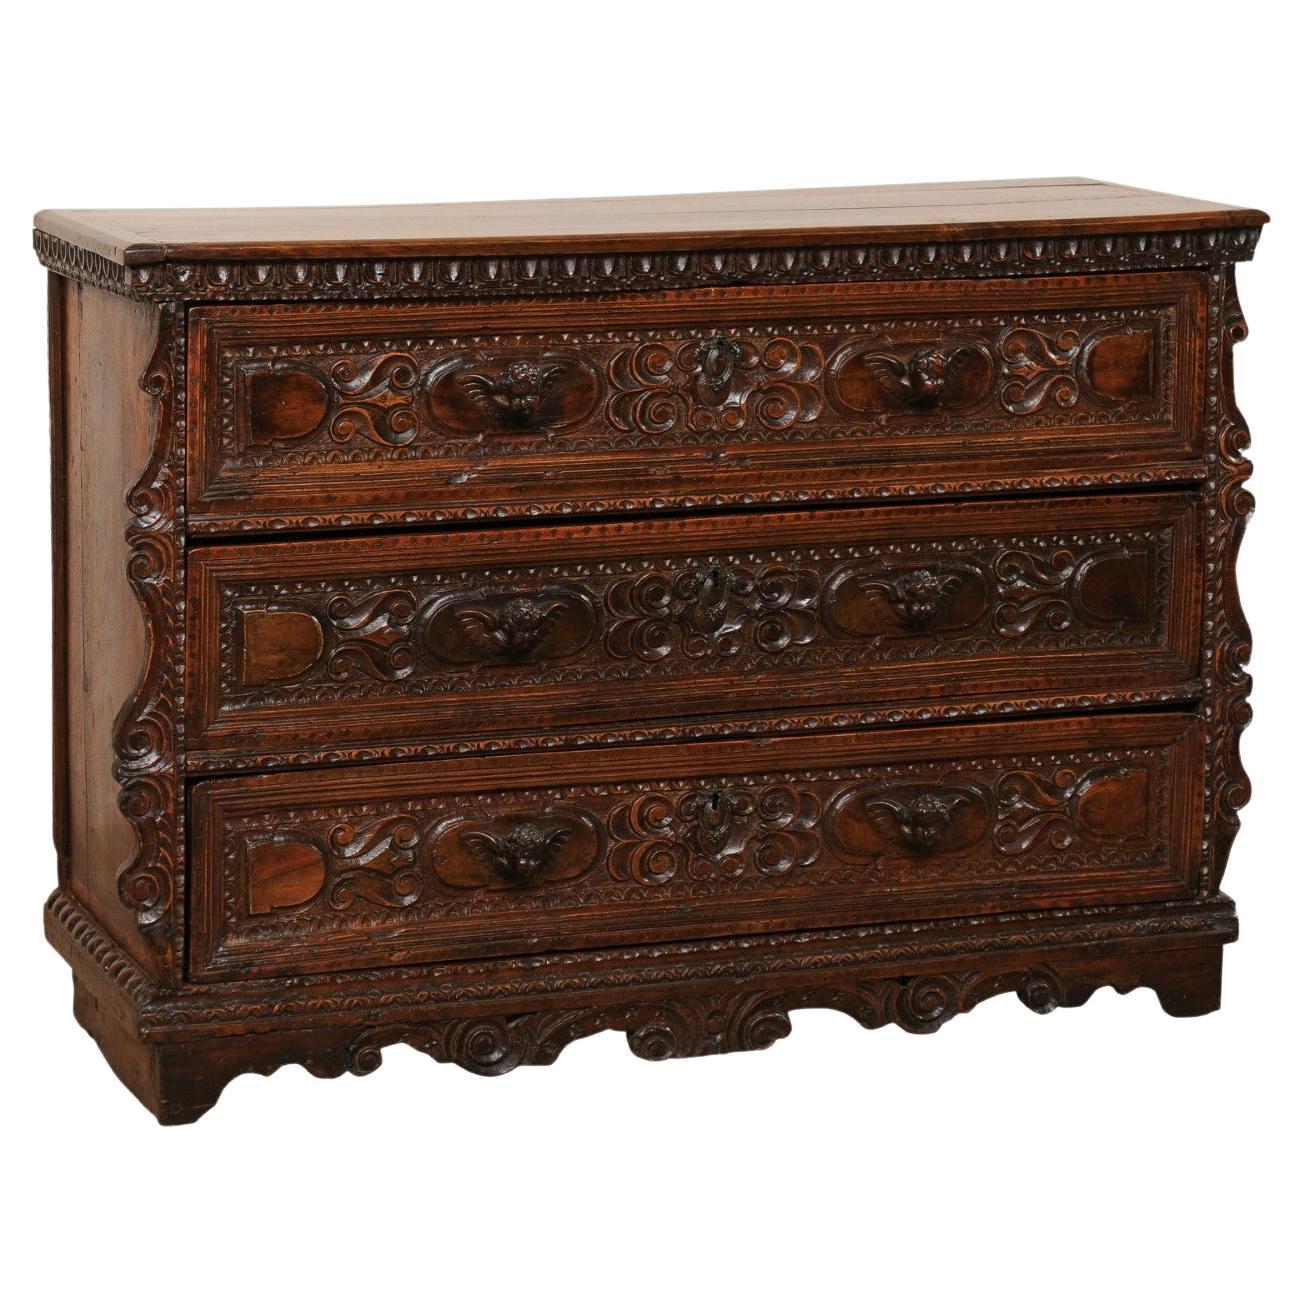 Early 18th C Italian Elaborately-Embellished Commode w/Putti Carved Drawer Pulls For Sale